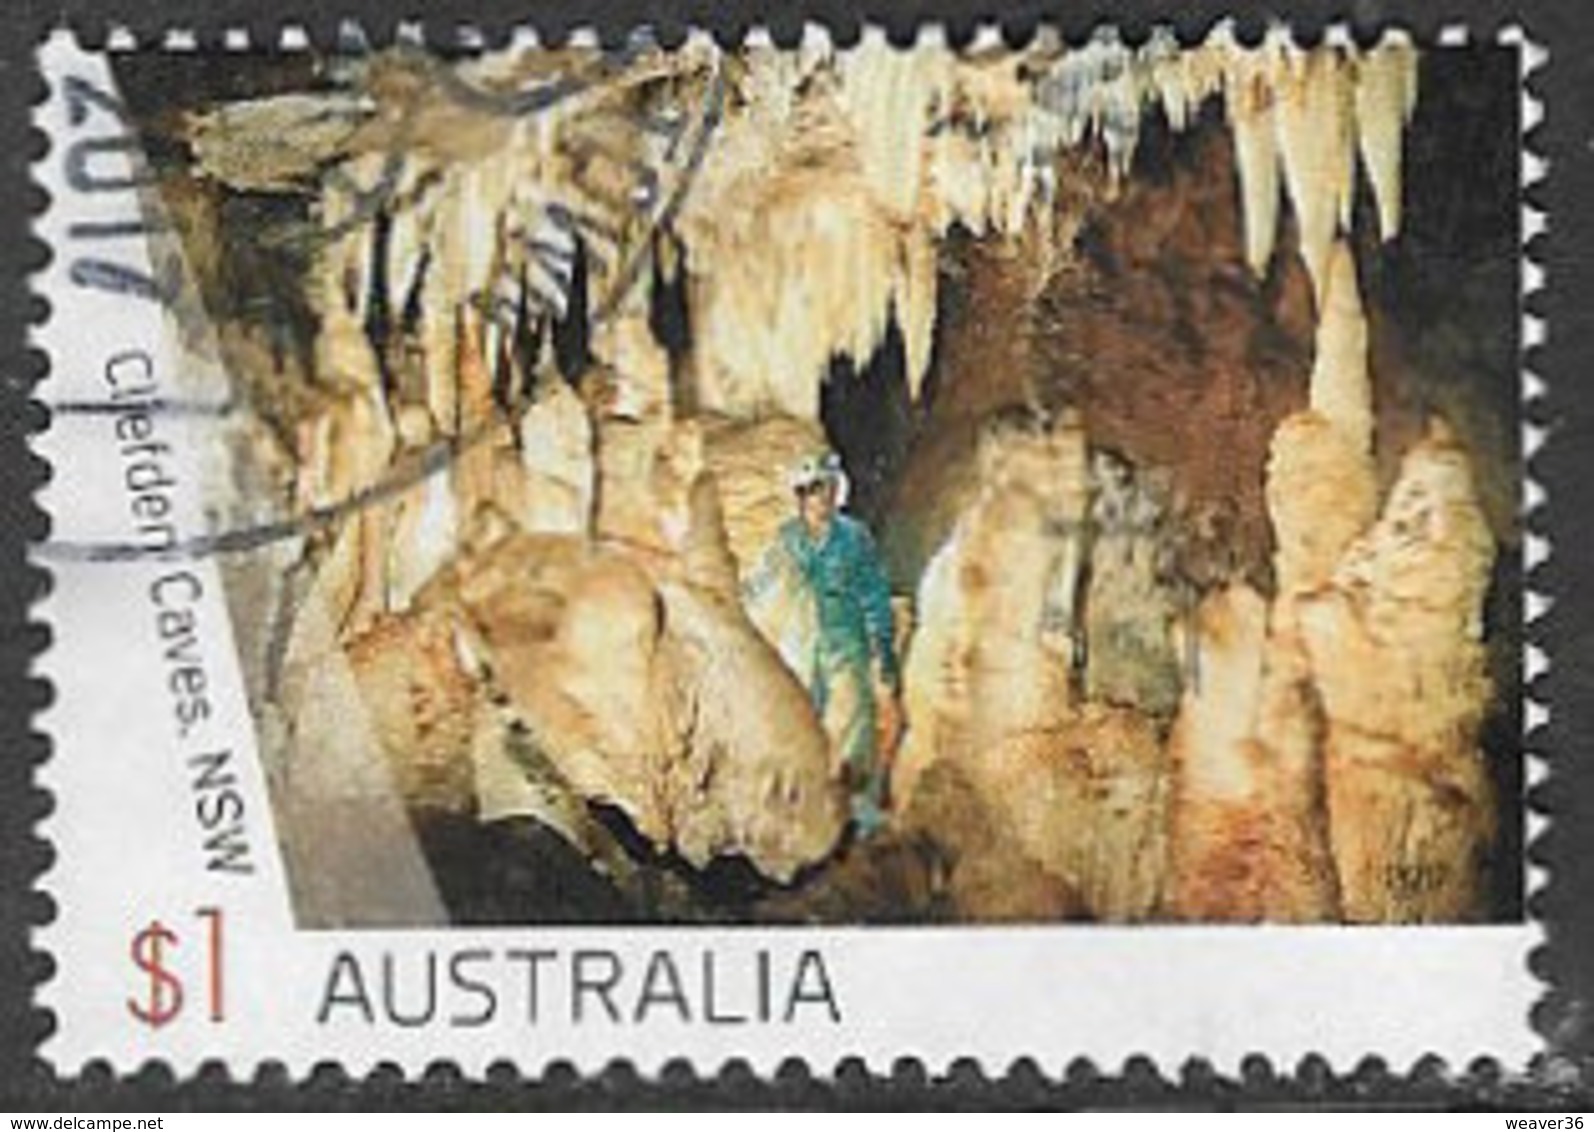 Australia 2017 Caves $1 Type 1 Sheet Stamp Good/fine Used [39/31929/ND] - Used Stamps